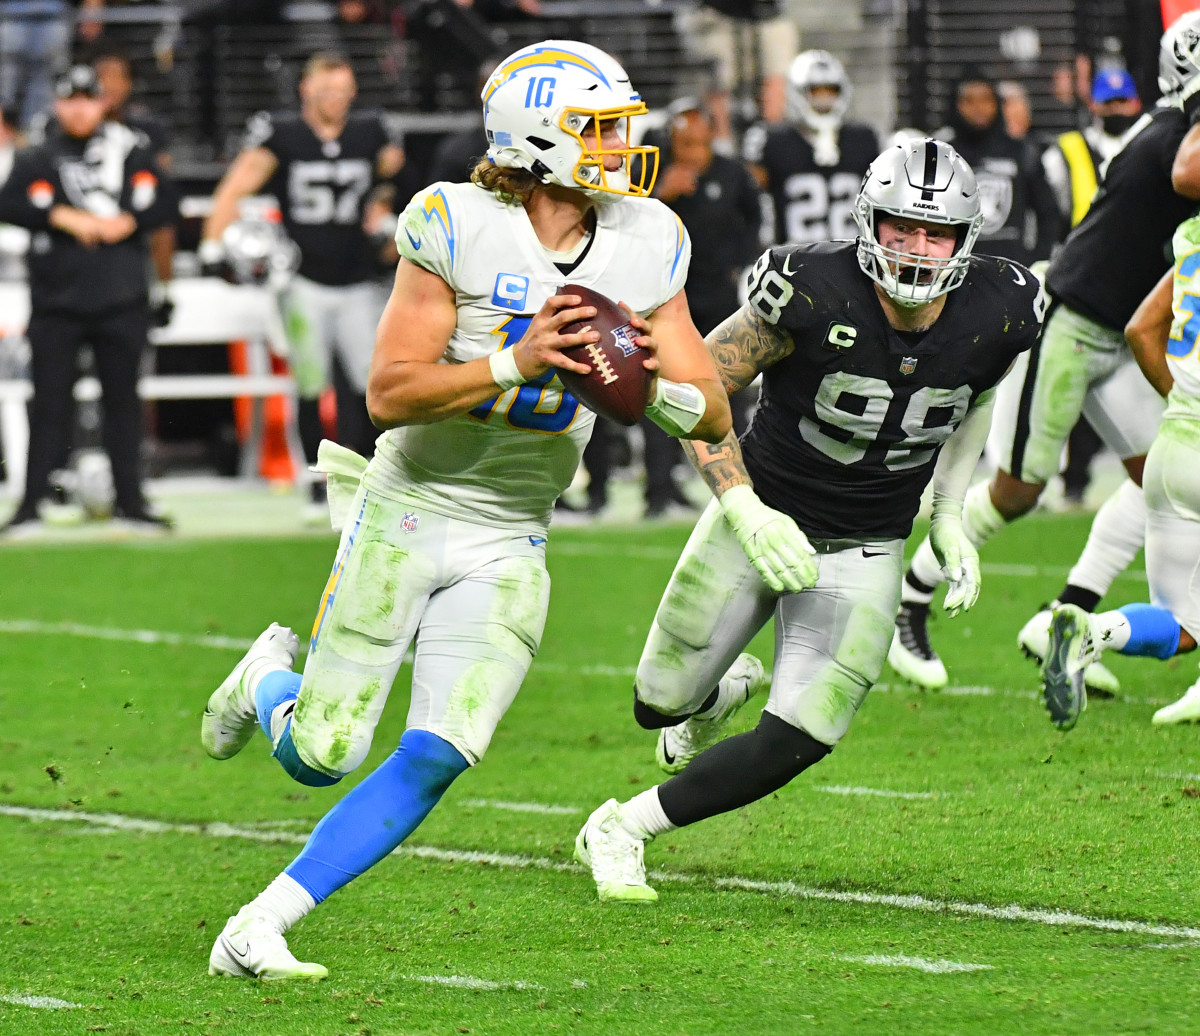 Jan 9, 2022; Paradise, Nevada, USA; Las Vegas Raiders defensive end Maxx Crosby (98) pressures Los Angeles Chargers quarterback Justin Herbert (10) during an overtime period at Allegiant Stadium. Mandatory Credit: Stephen R. Sylvanie-USA TODAY Sports